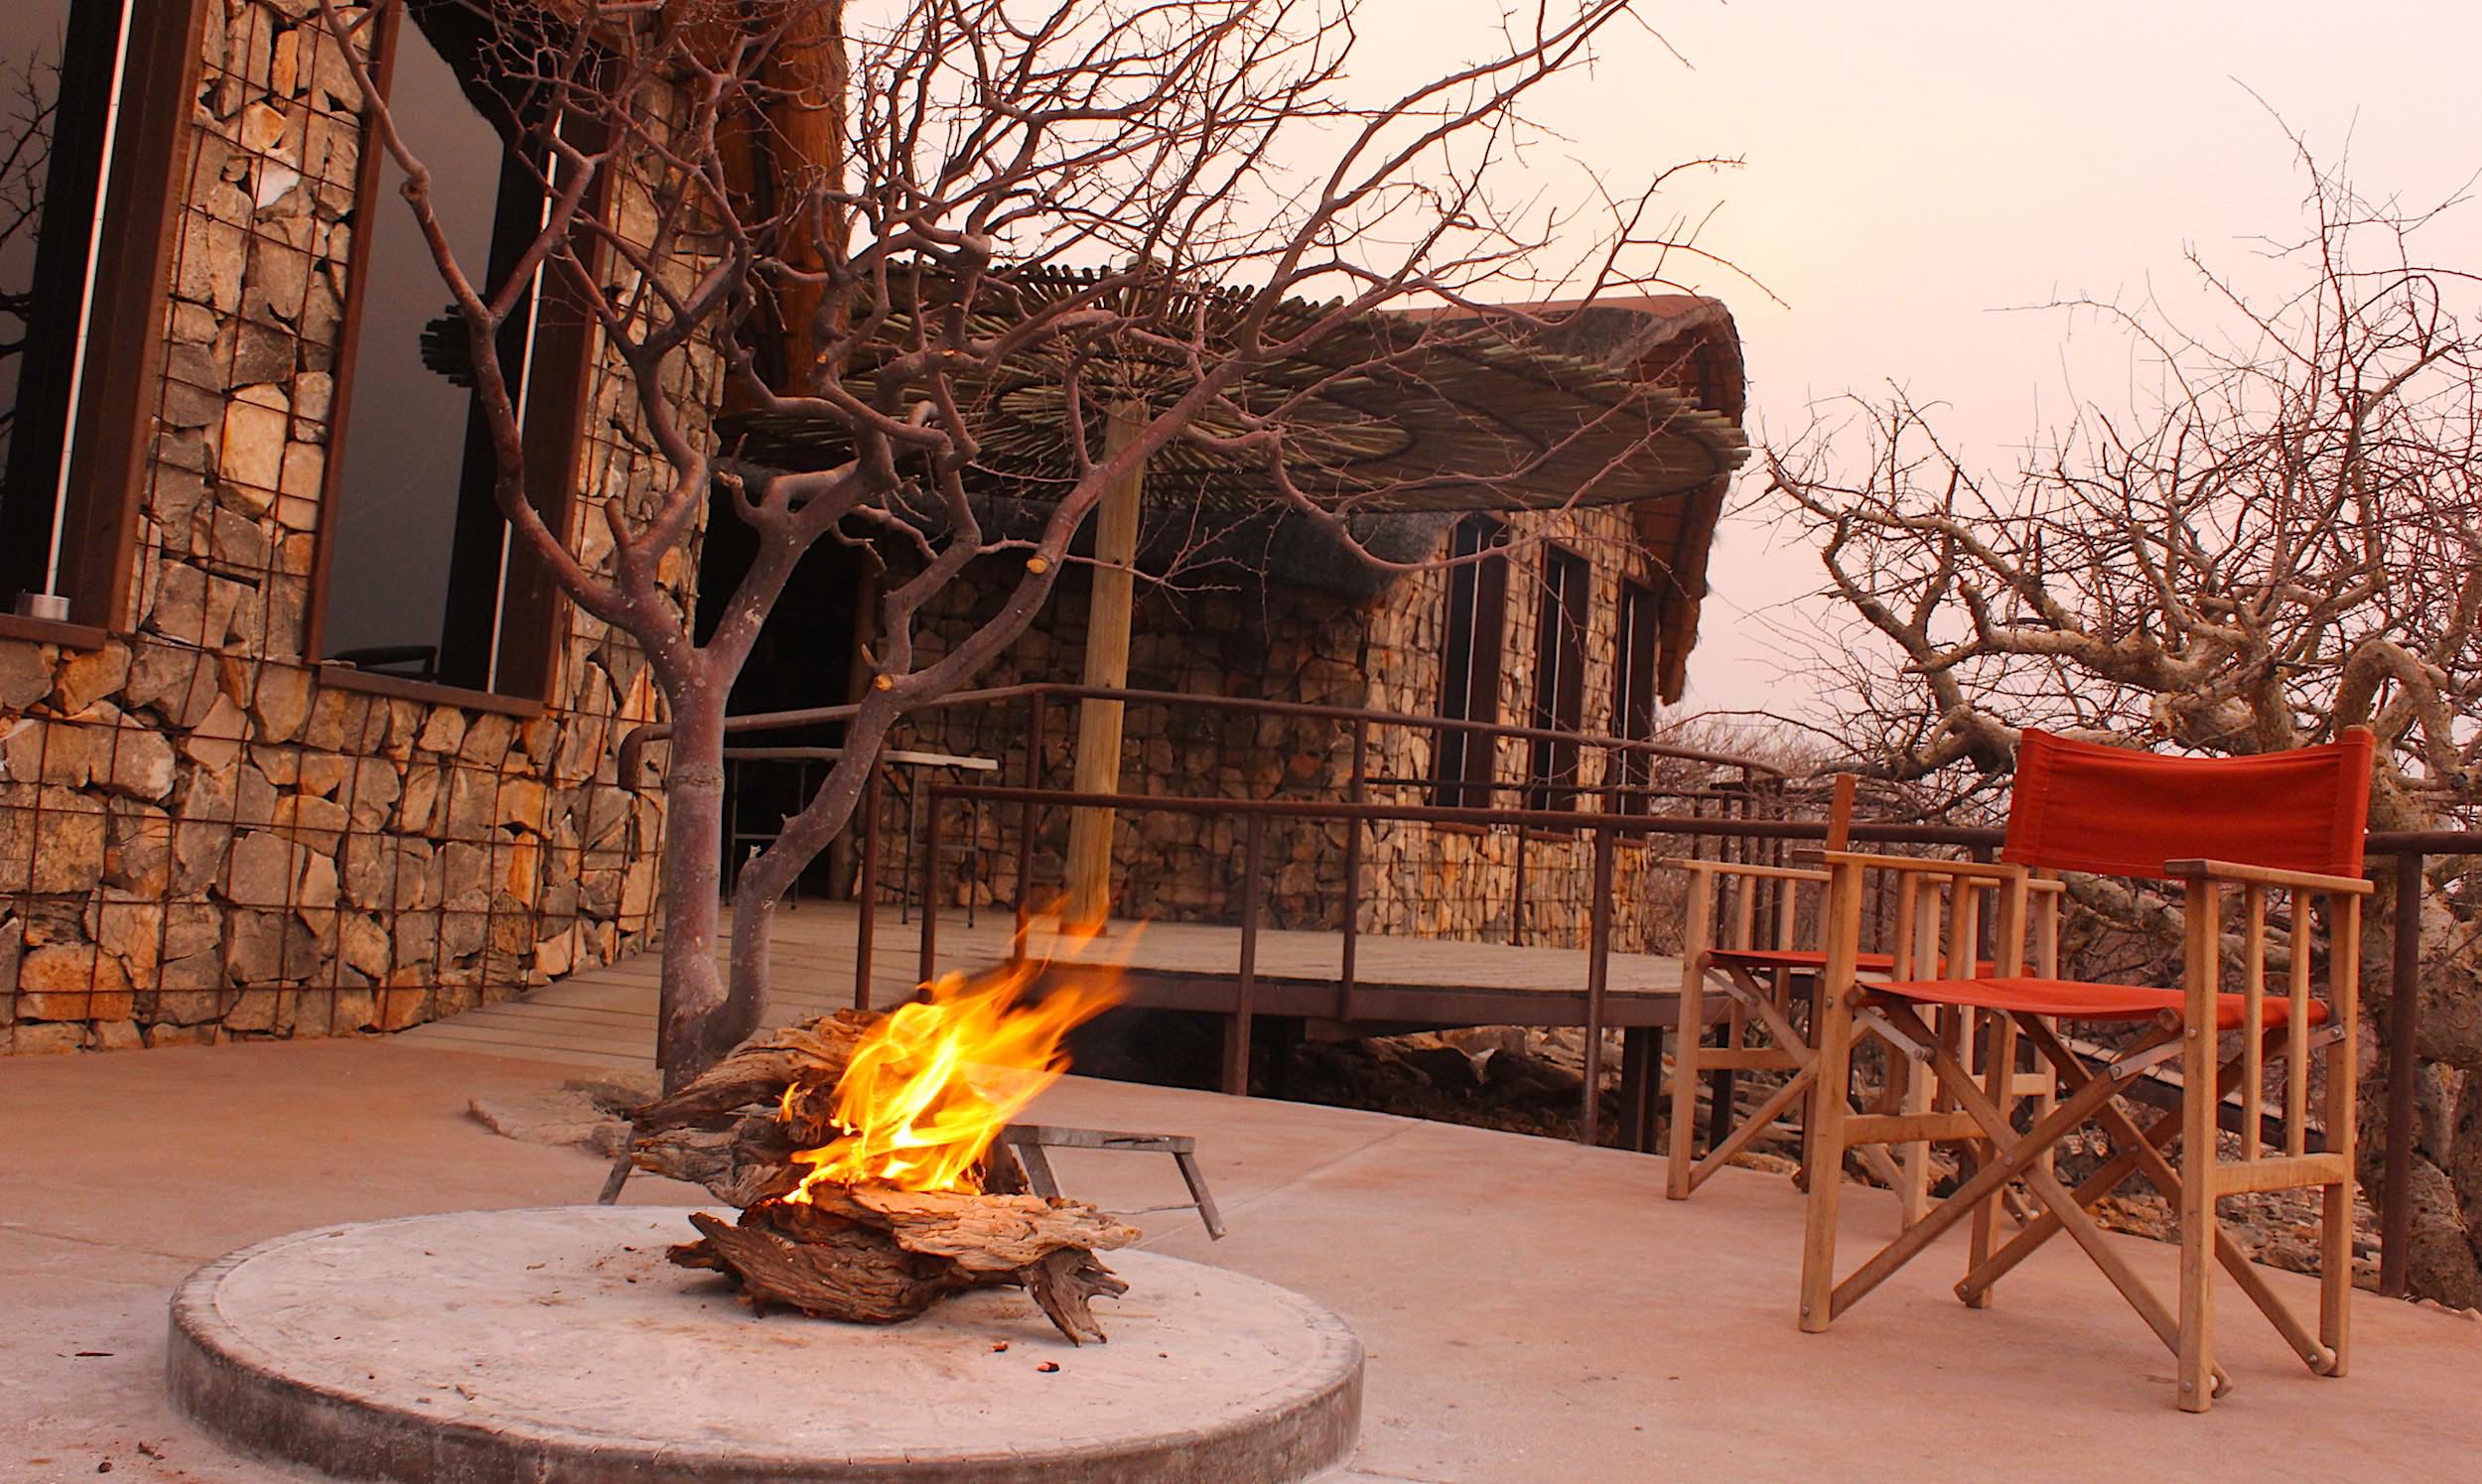 A fire burns in the firepit on the main deck at Etambura lodge in northern Namibia.